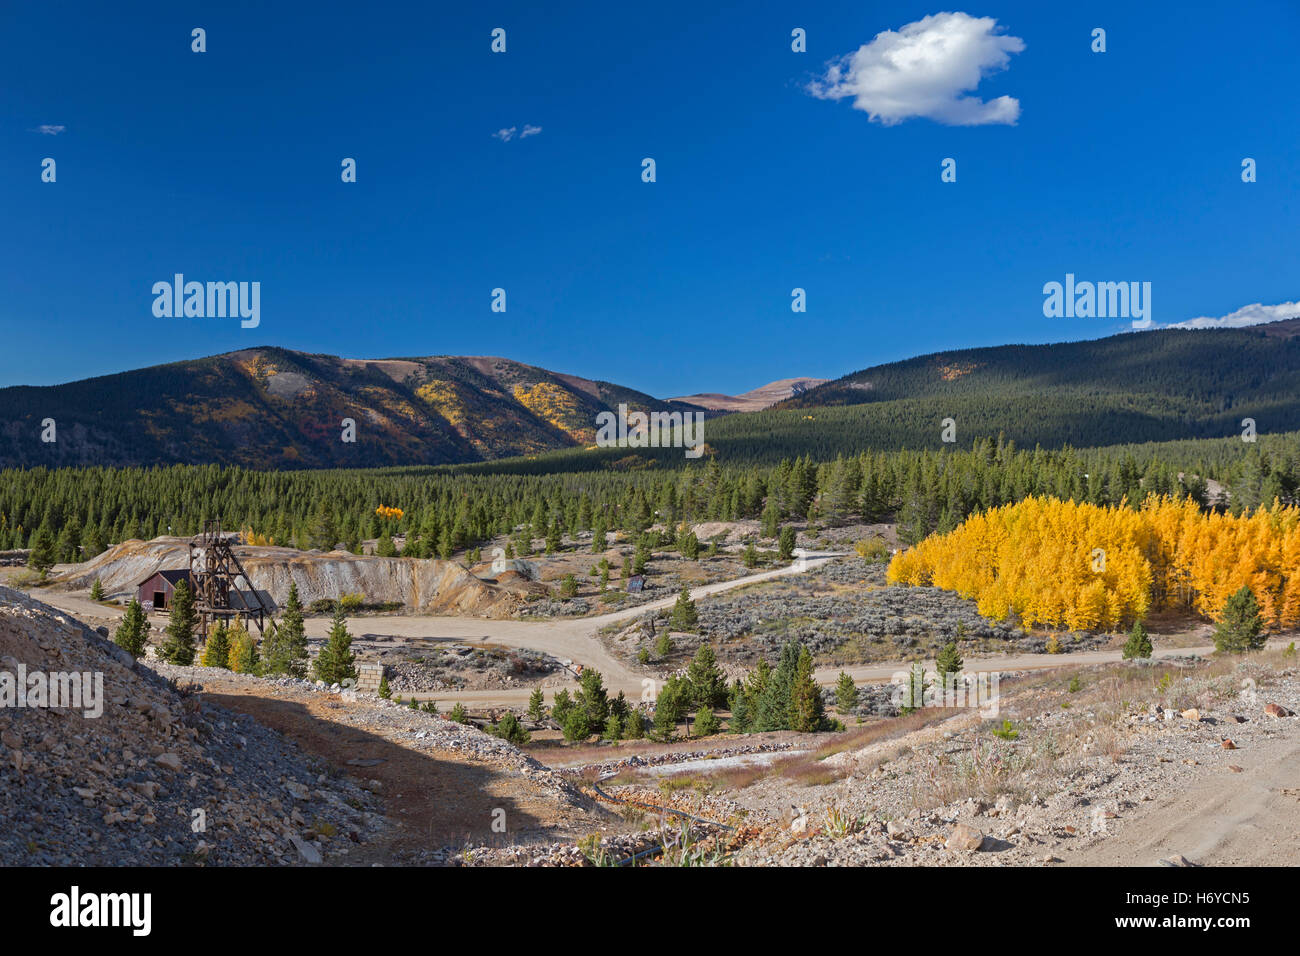 Leadville, Colorado - Site of a major labor battle in 1896 between striking miners and company guards. Stock Photo